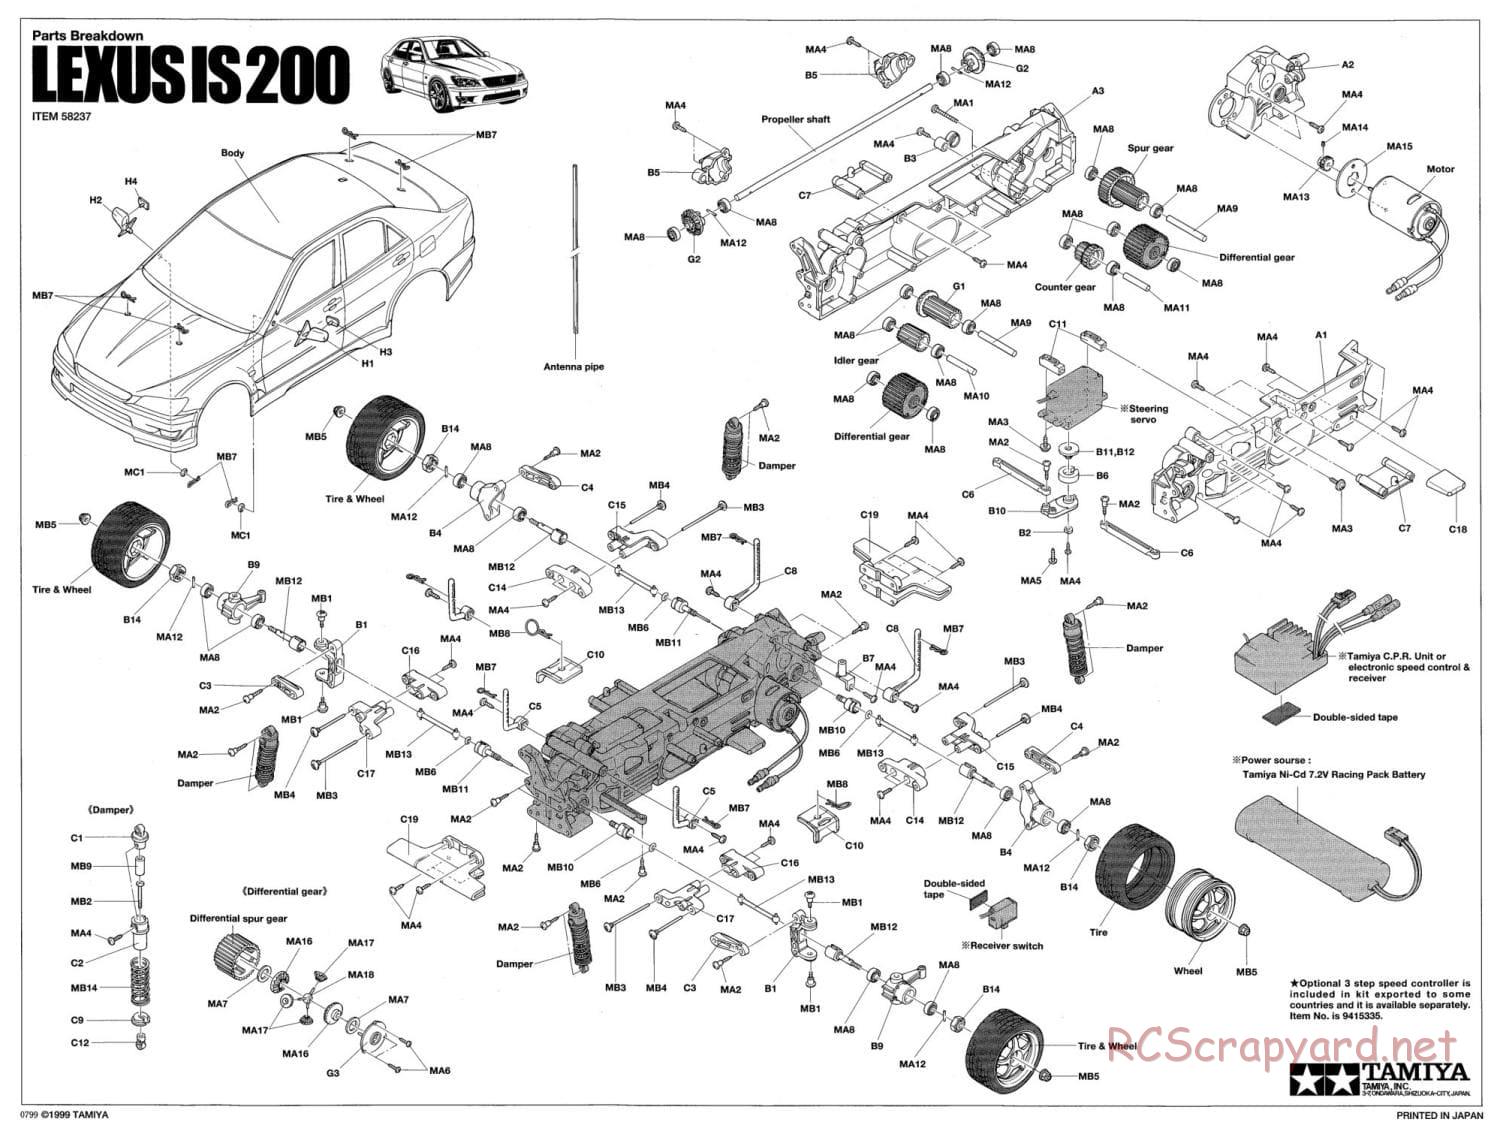 Tamiya - Lexus IS 200 - TL-01 Chassis - Exploded View